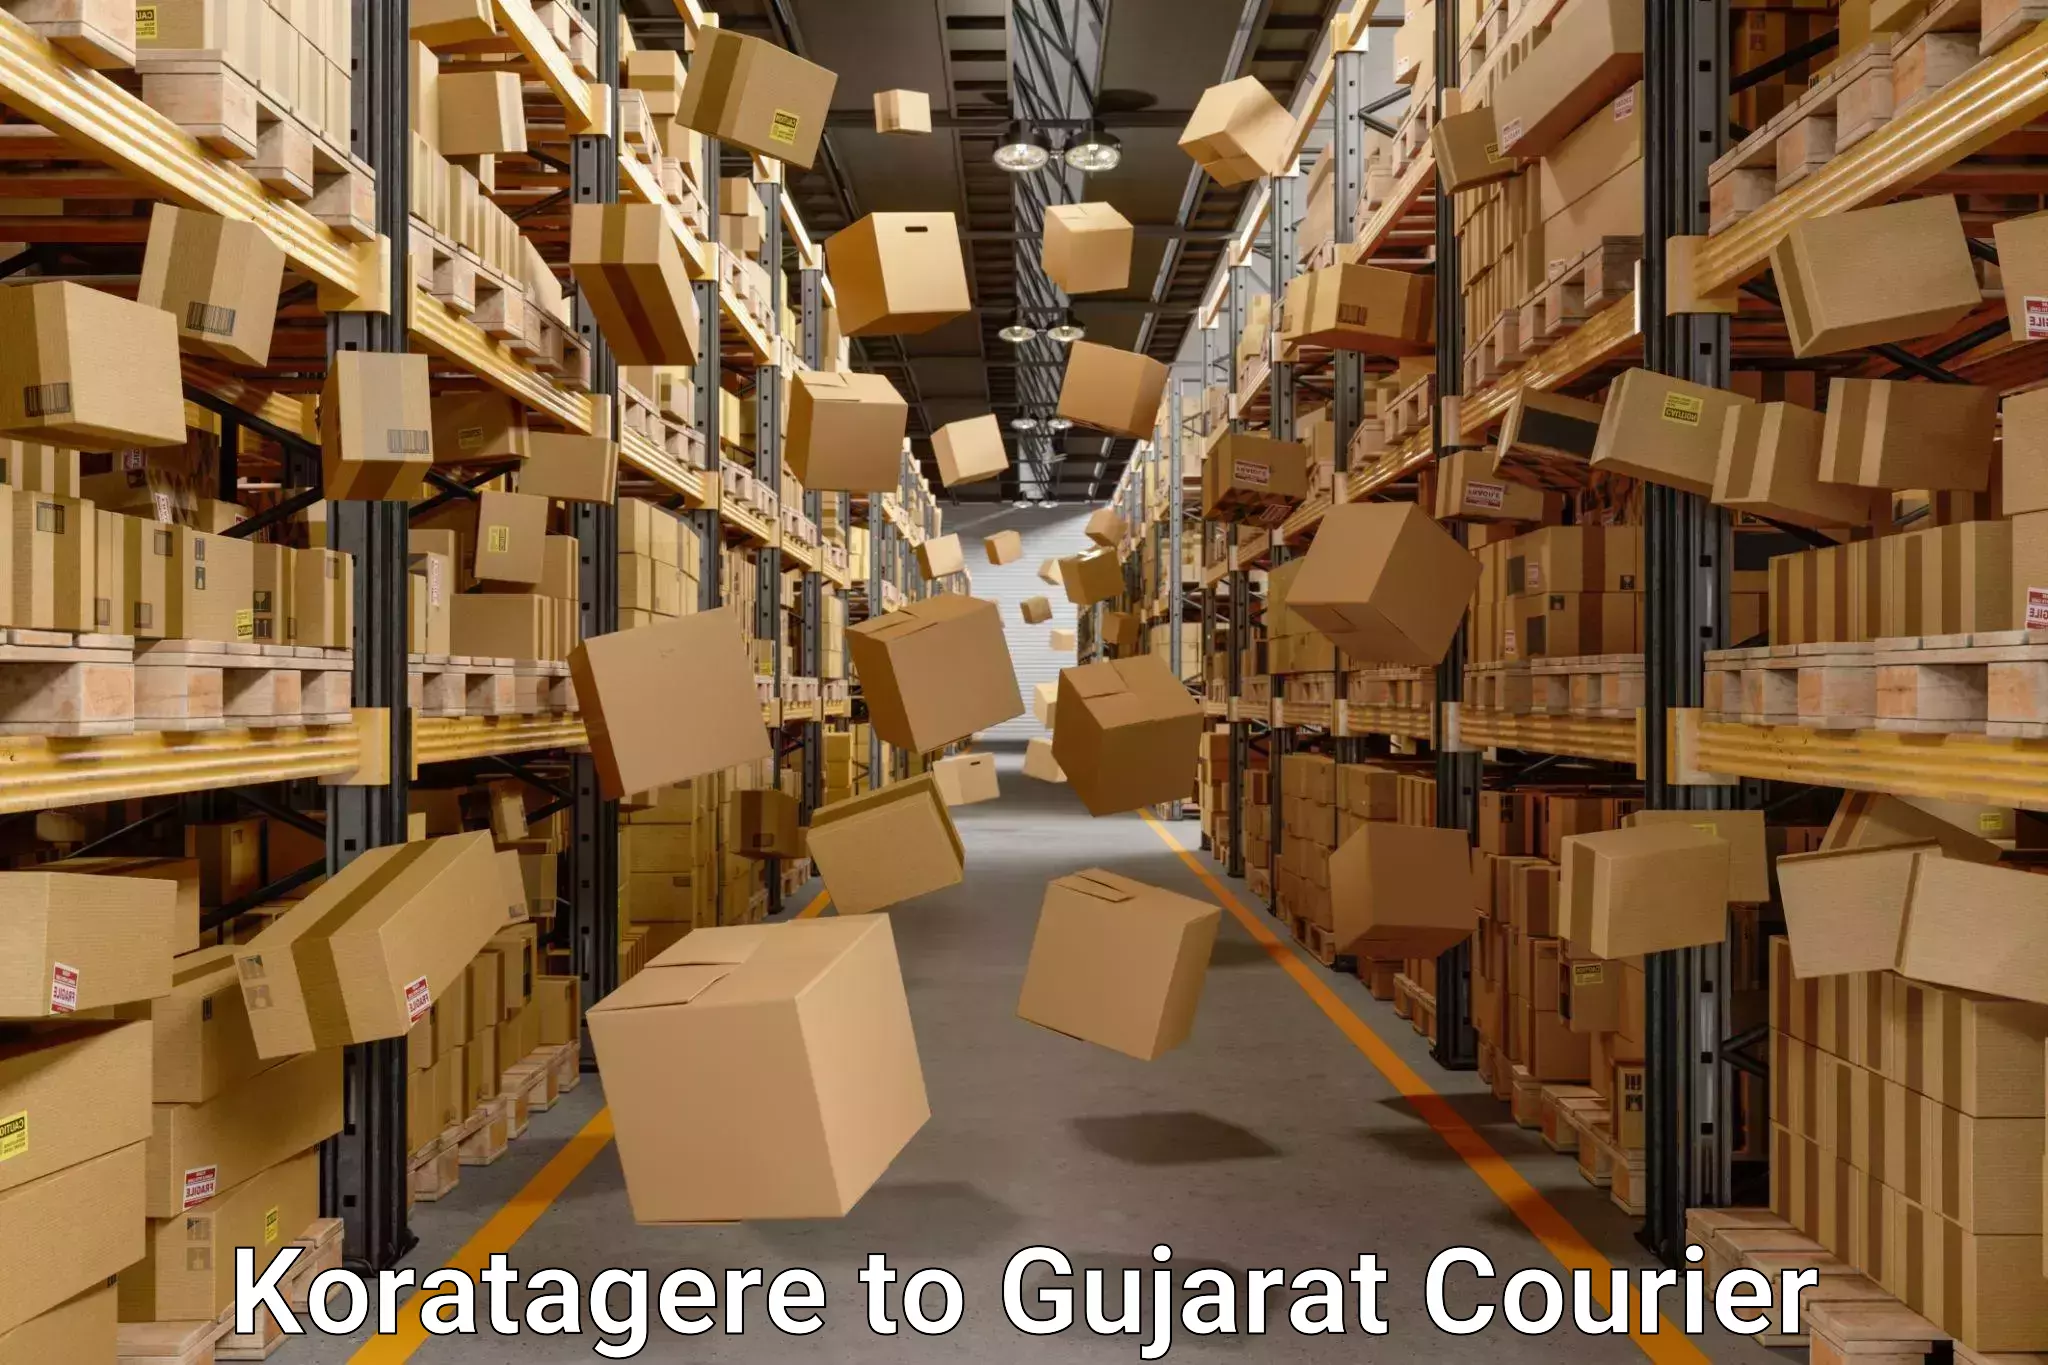 Trusted moving company Koratagere to Surat